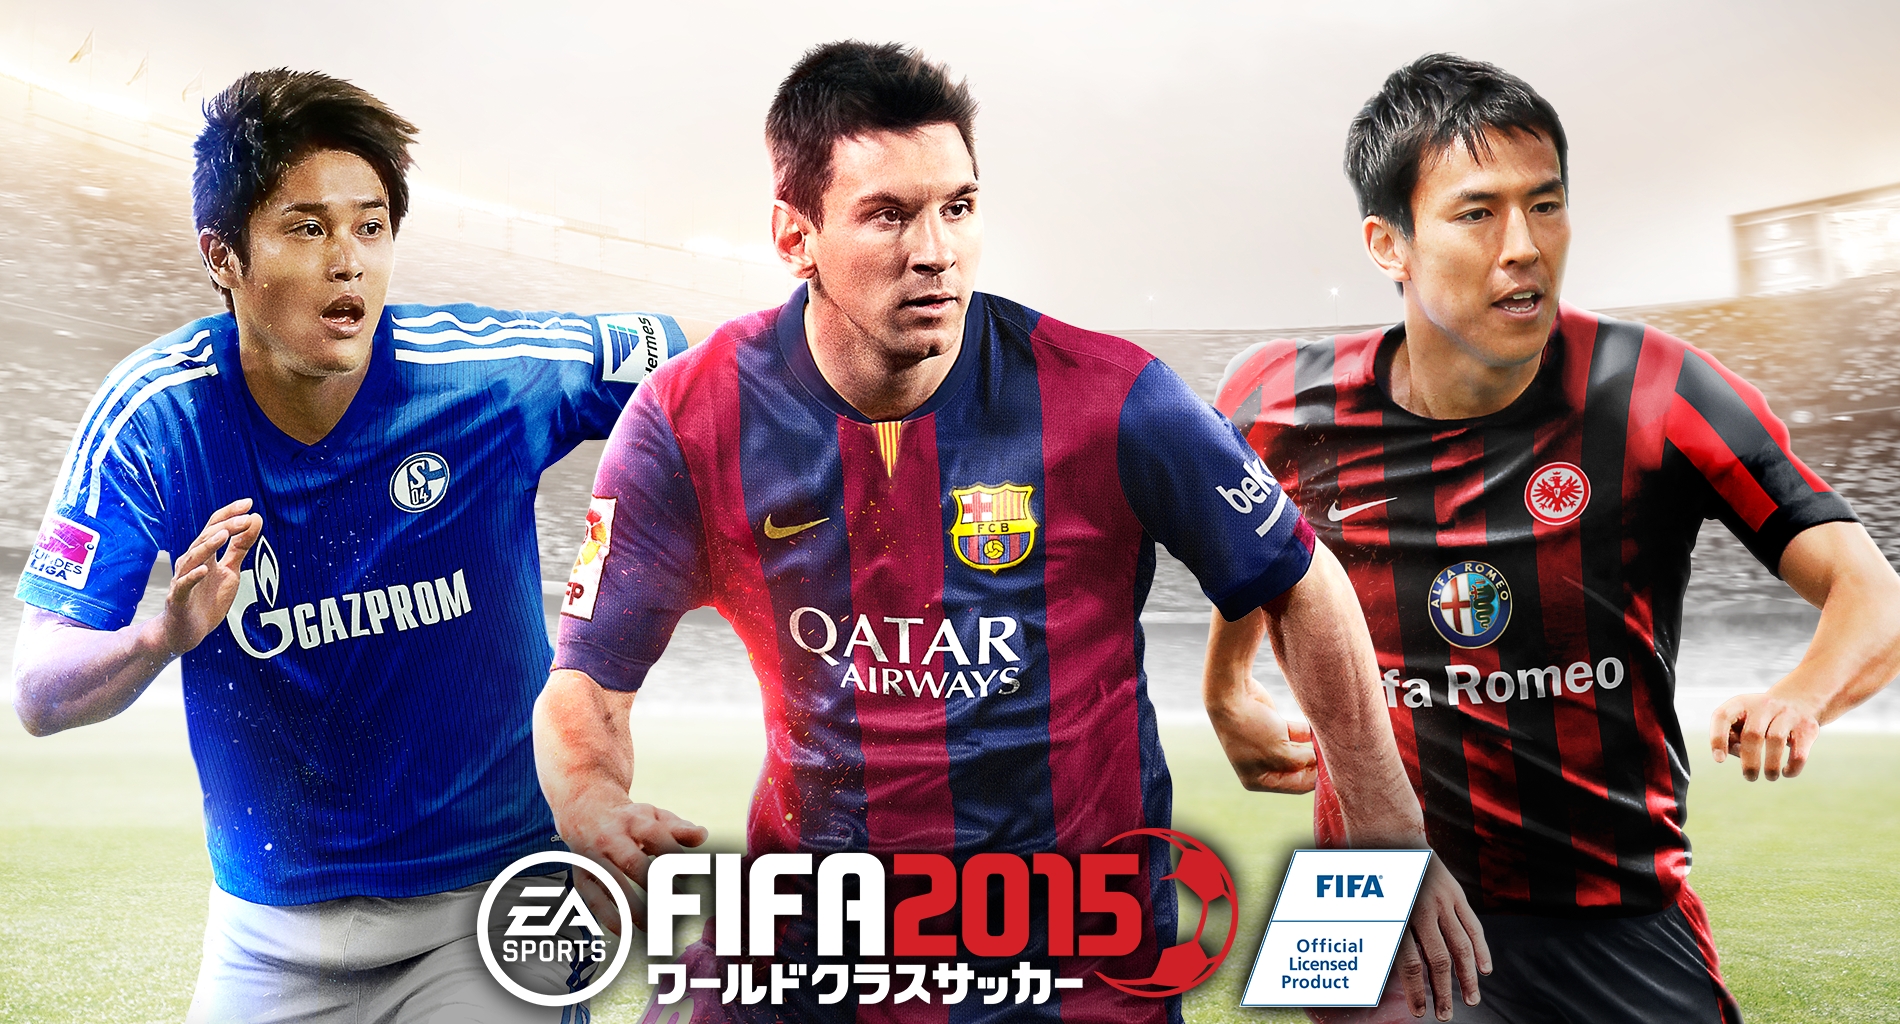 Ios Android Fifa ワールドクラスサッカー 2015 欧州リーグ対応のアップデートを実施 Game Watch